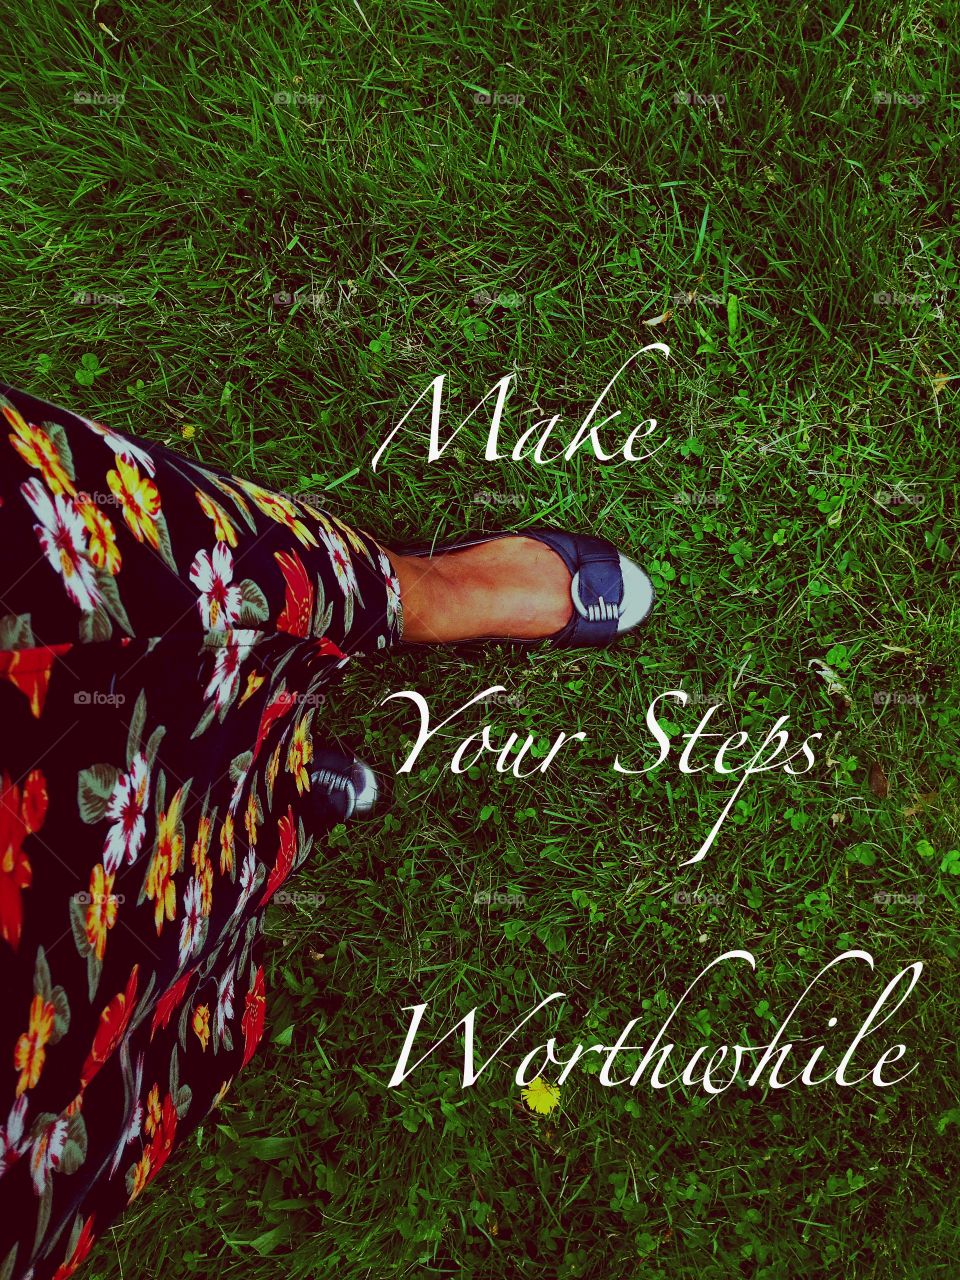 Make Yours Steps Worthwhile. I took this picture of my foot and than I wandered of making my own quote! Lots of people say this sometimes but I made it my own!